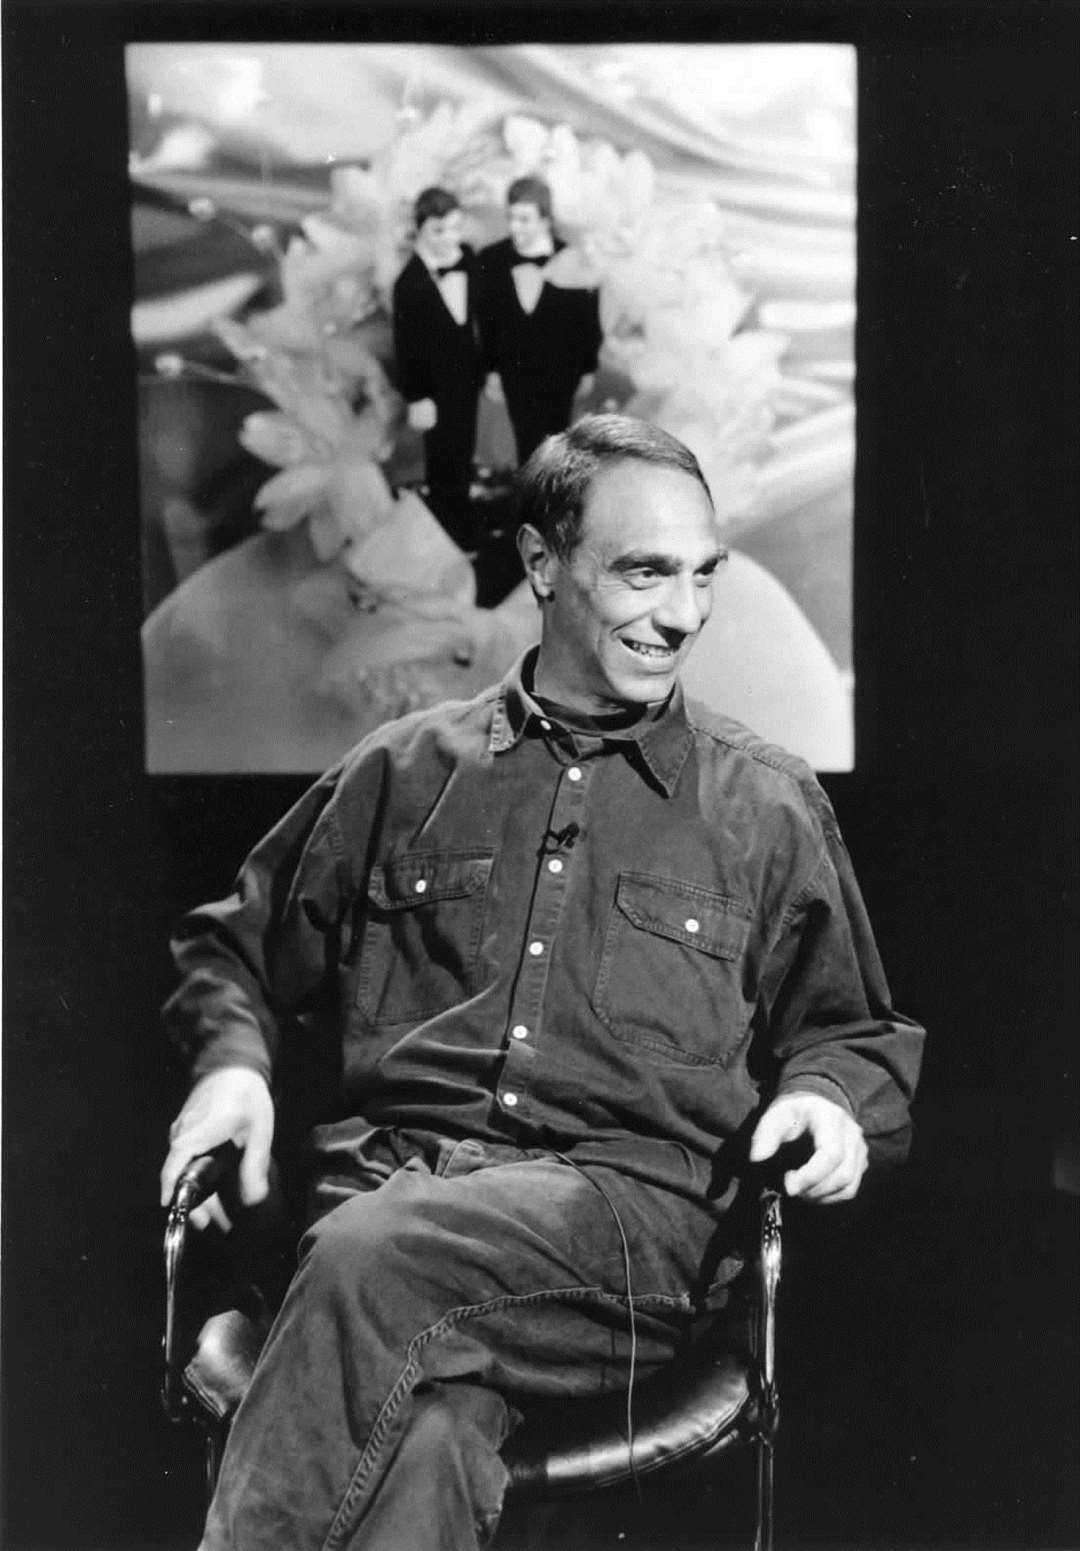 Derek Jarman talked openly about gay rights and dealing with HIV